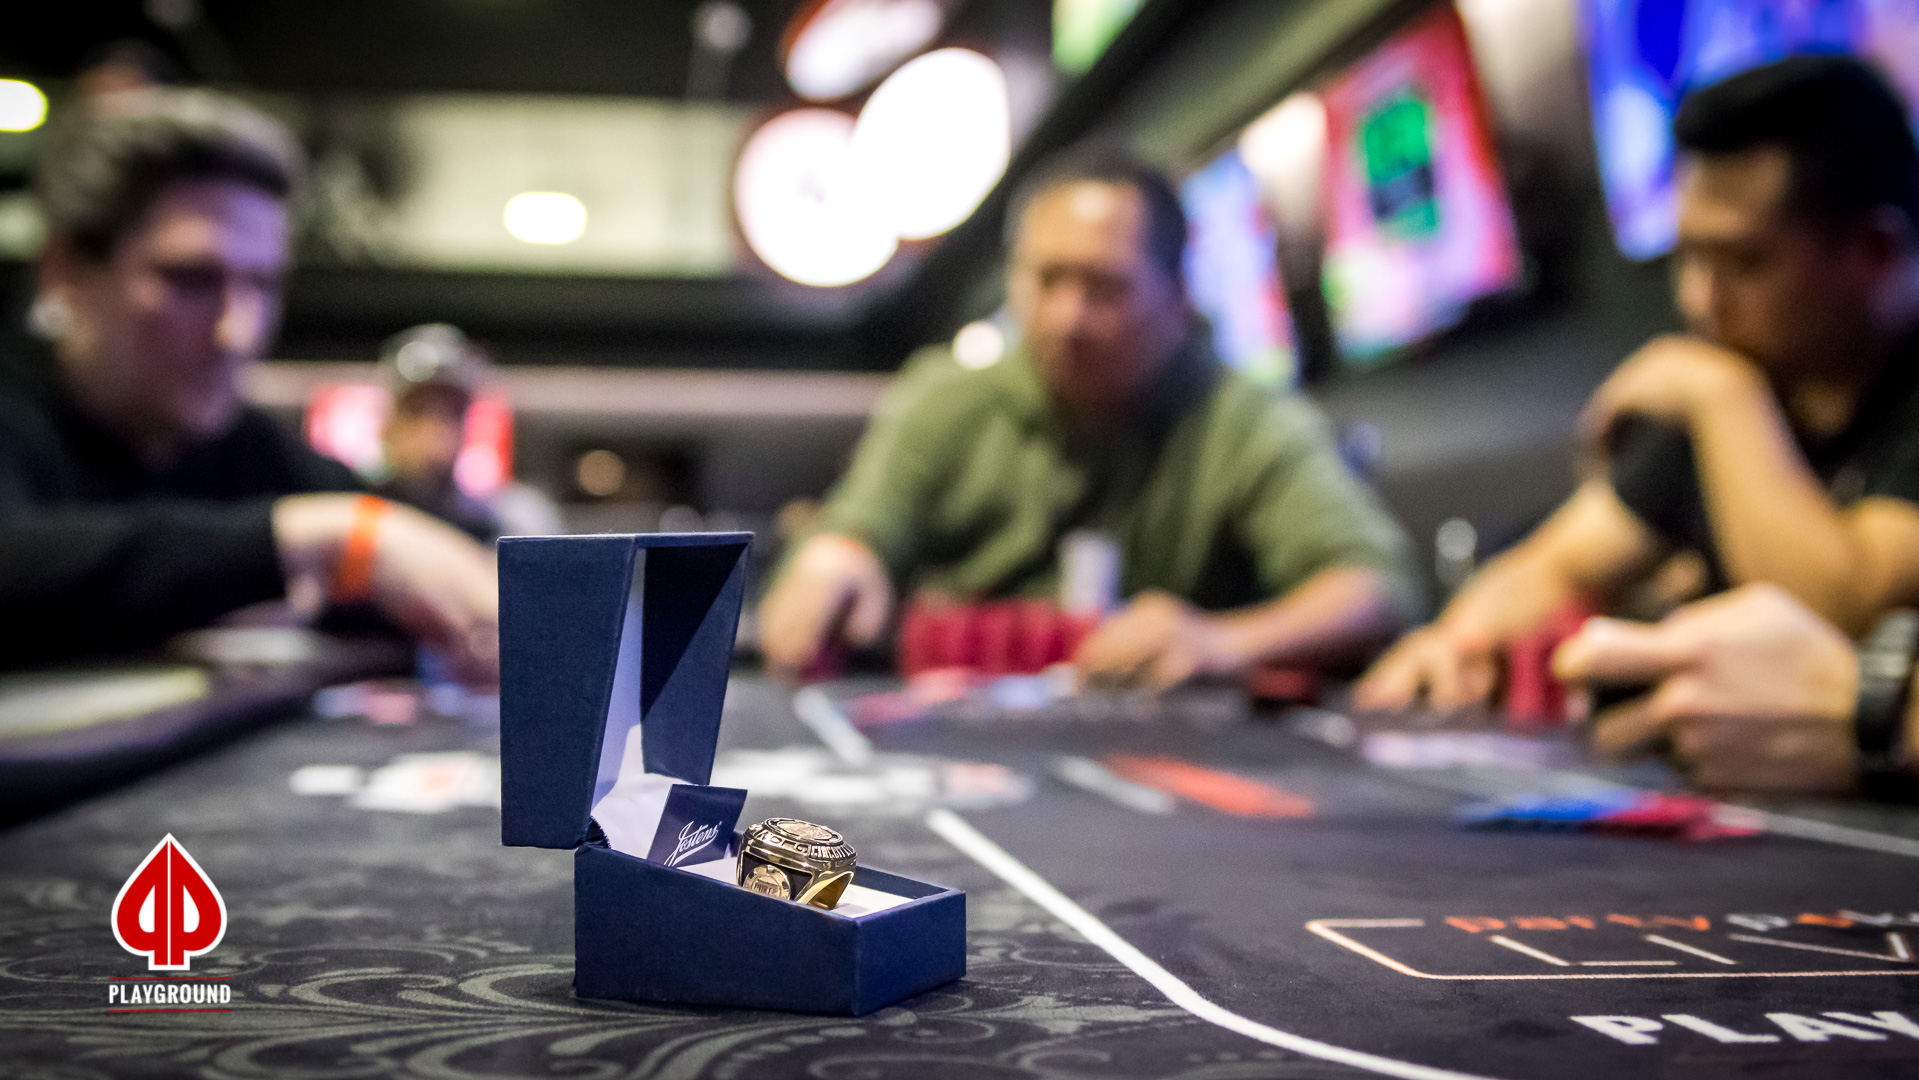 Tran in the lead as the High Roller is now three handed